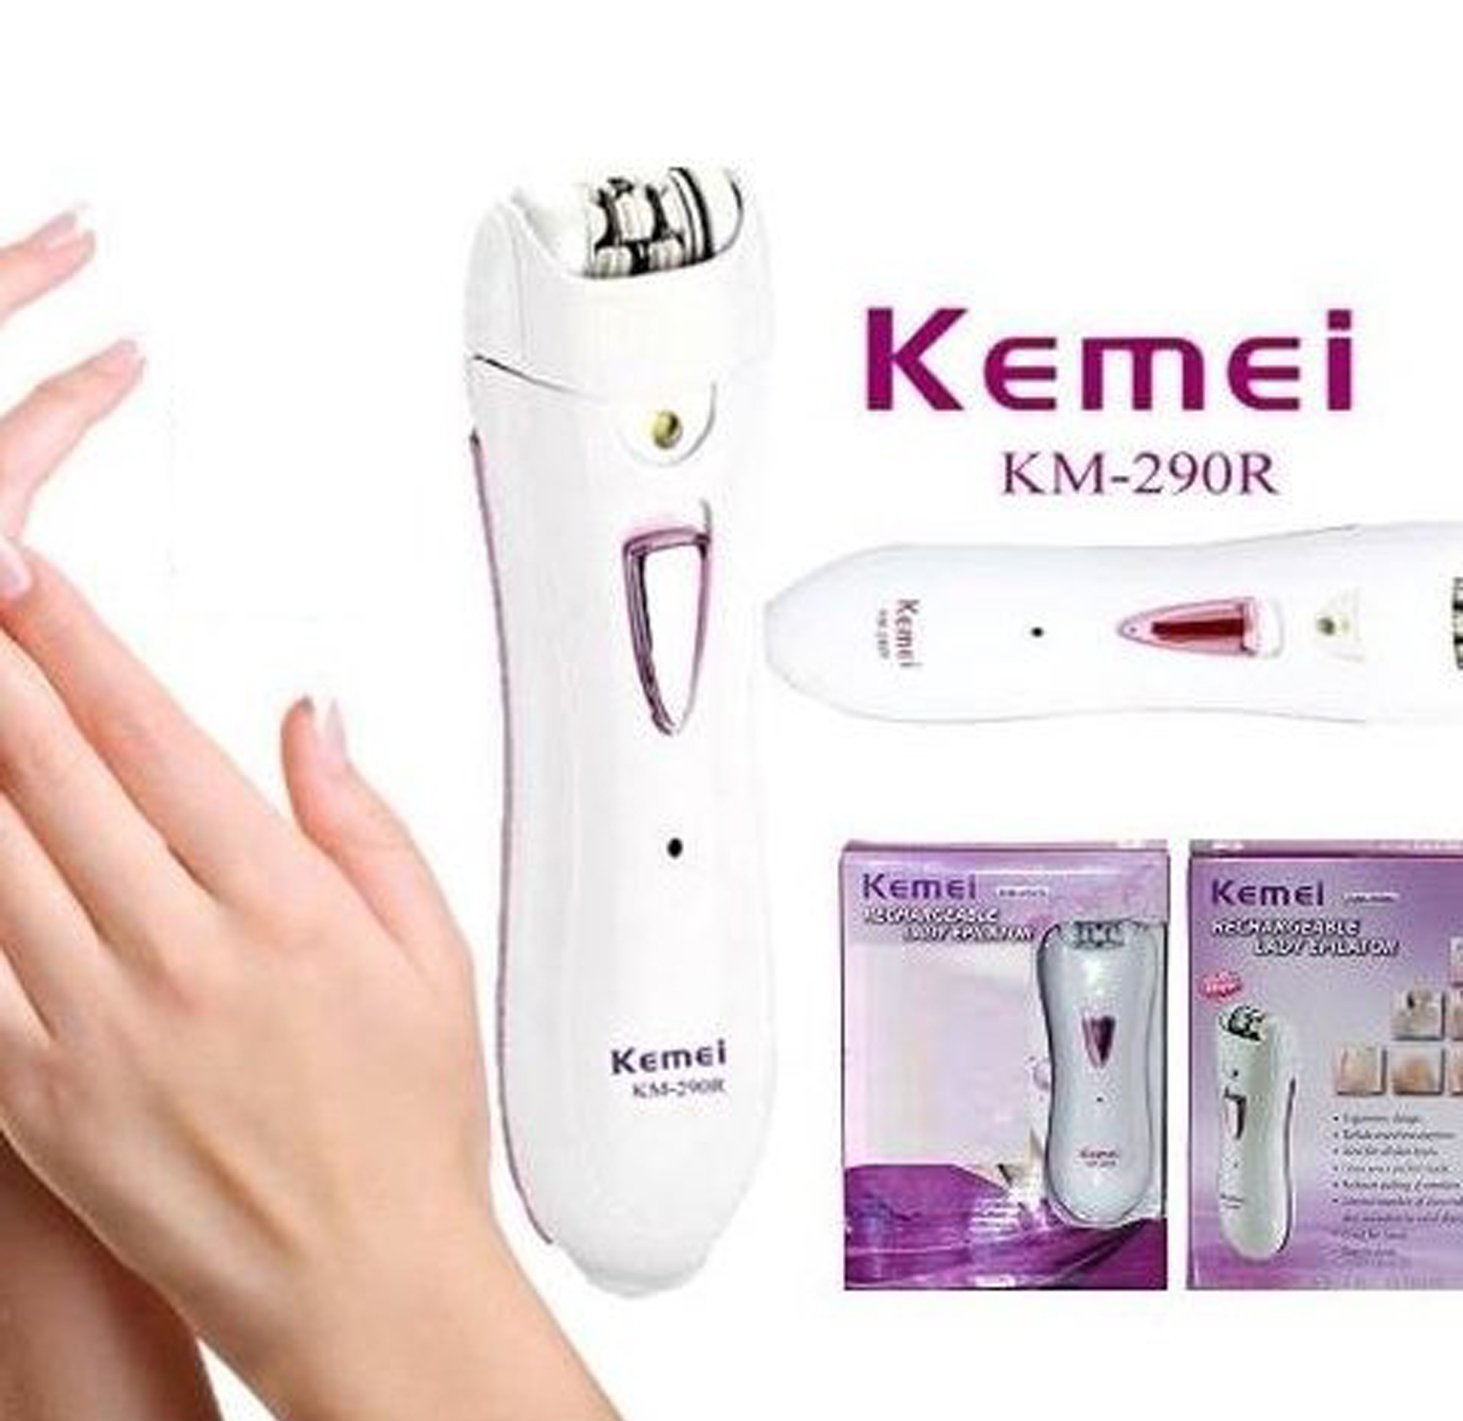 kemei lady shaver review